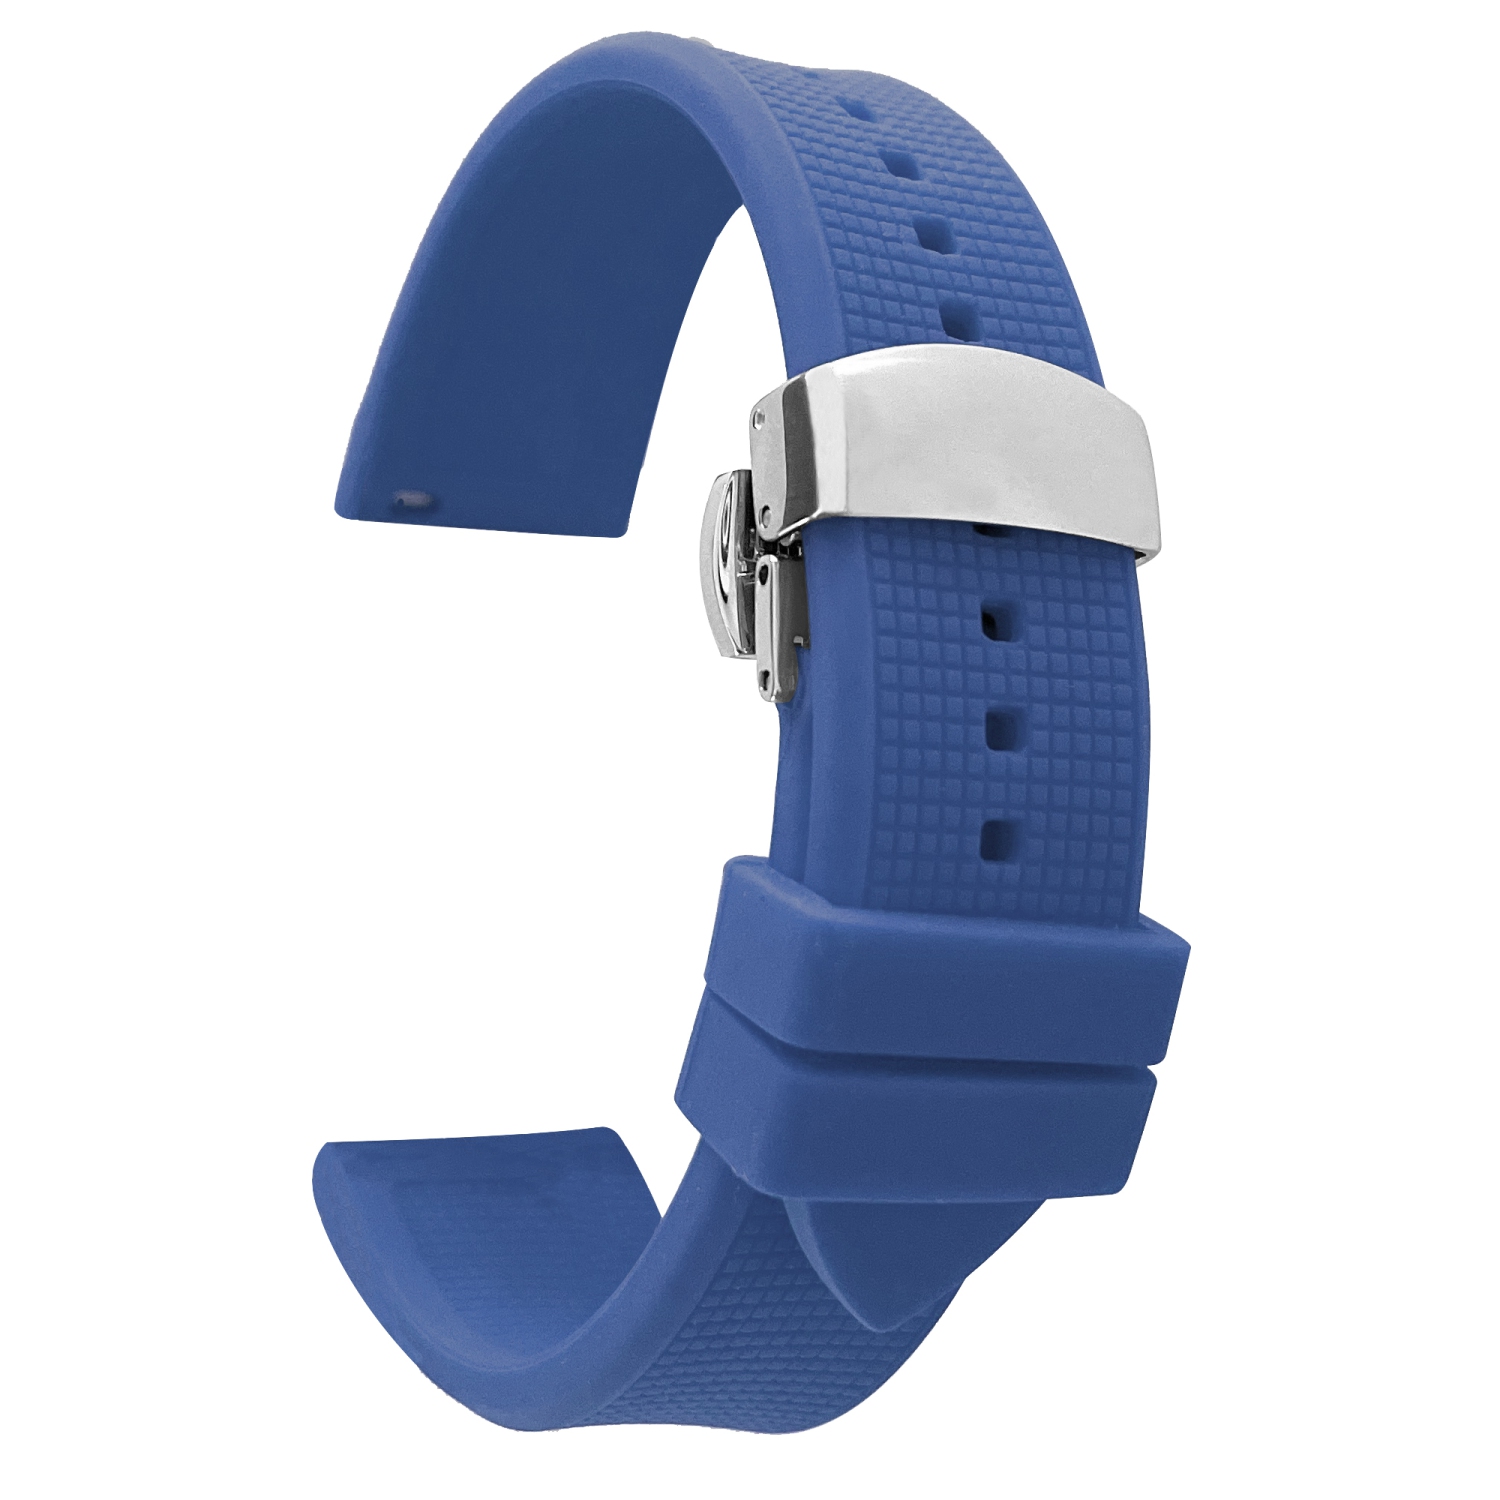 Bandini Waterproof Soft Rubber Silicone Deployment Smart Watch Band Strap For Amazfit Bip, U, S, Lite, GTR 42mm, GTS - 20mm, Blue